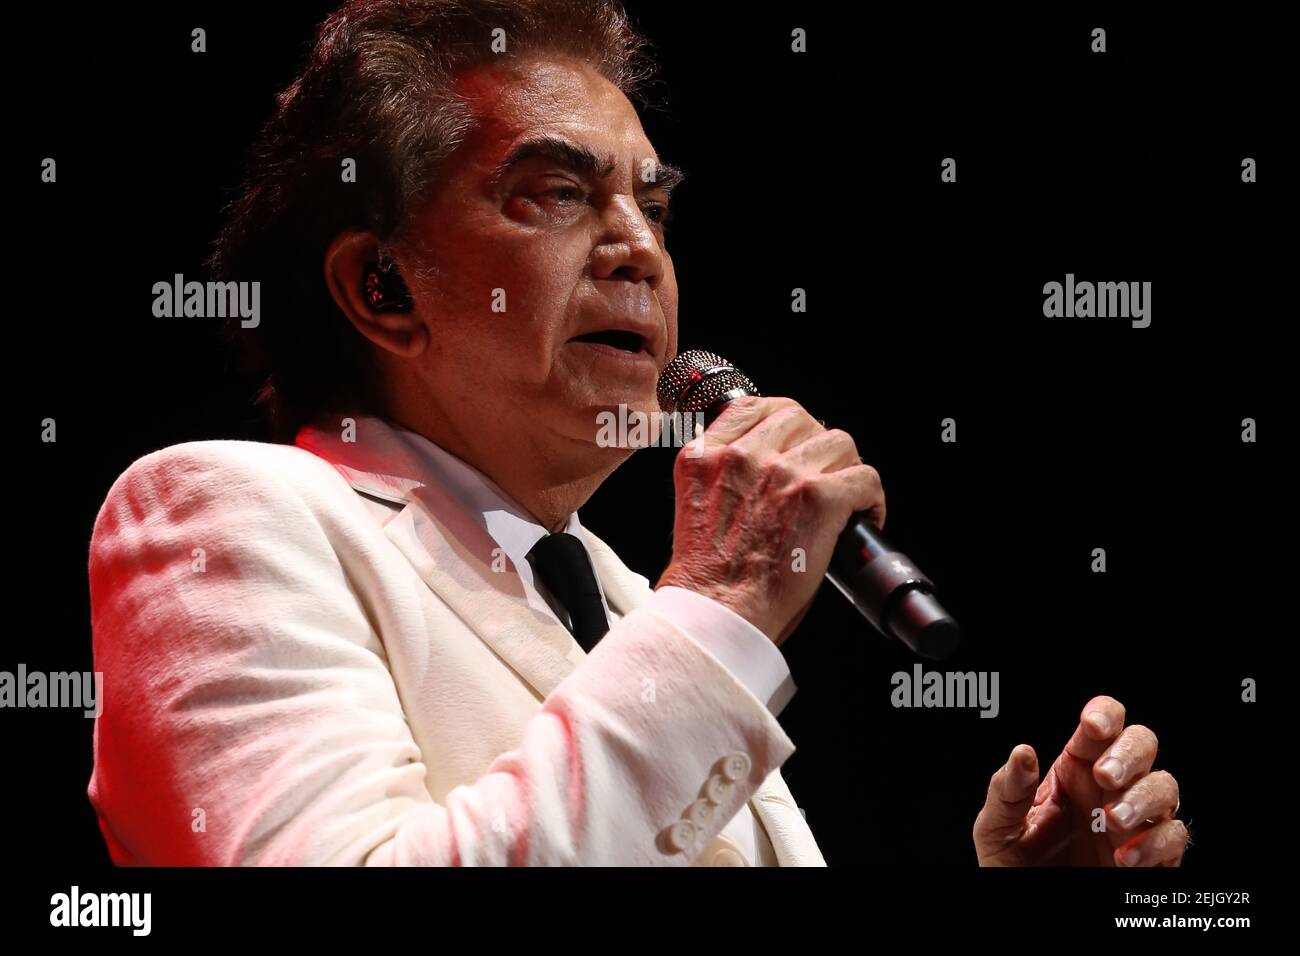 MEXICO CITY, MEXICO - FEBRUARY 7: Venezuelan singer Jose Luis Rodriguez 'El  Puma' , 77, performs on stage during his Agradecido Tour at Mexico City  Arena. on February 7, 2020 in Mexico